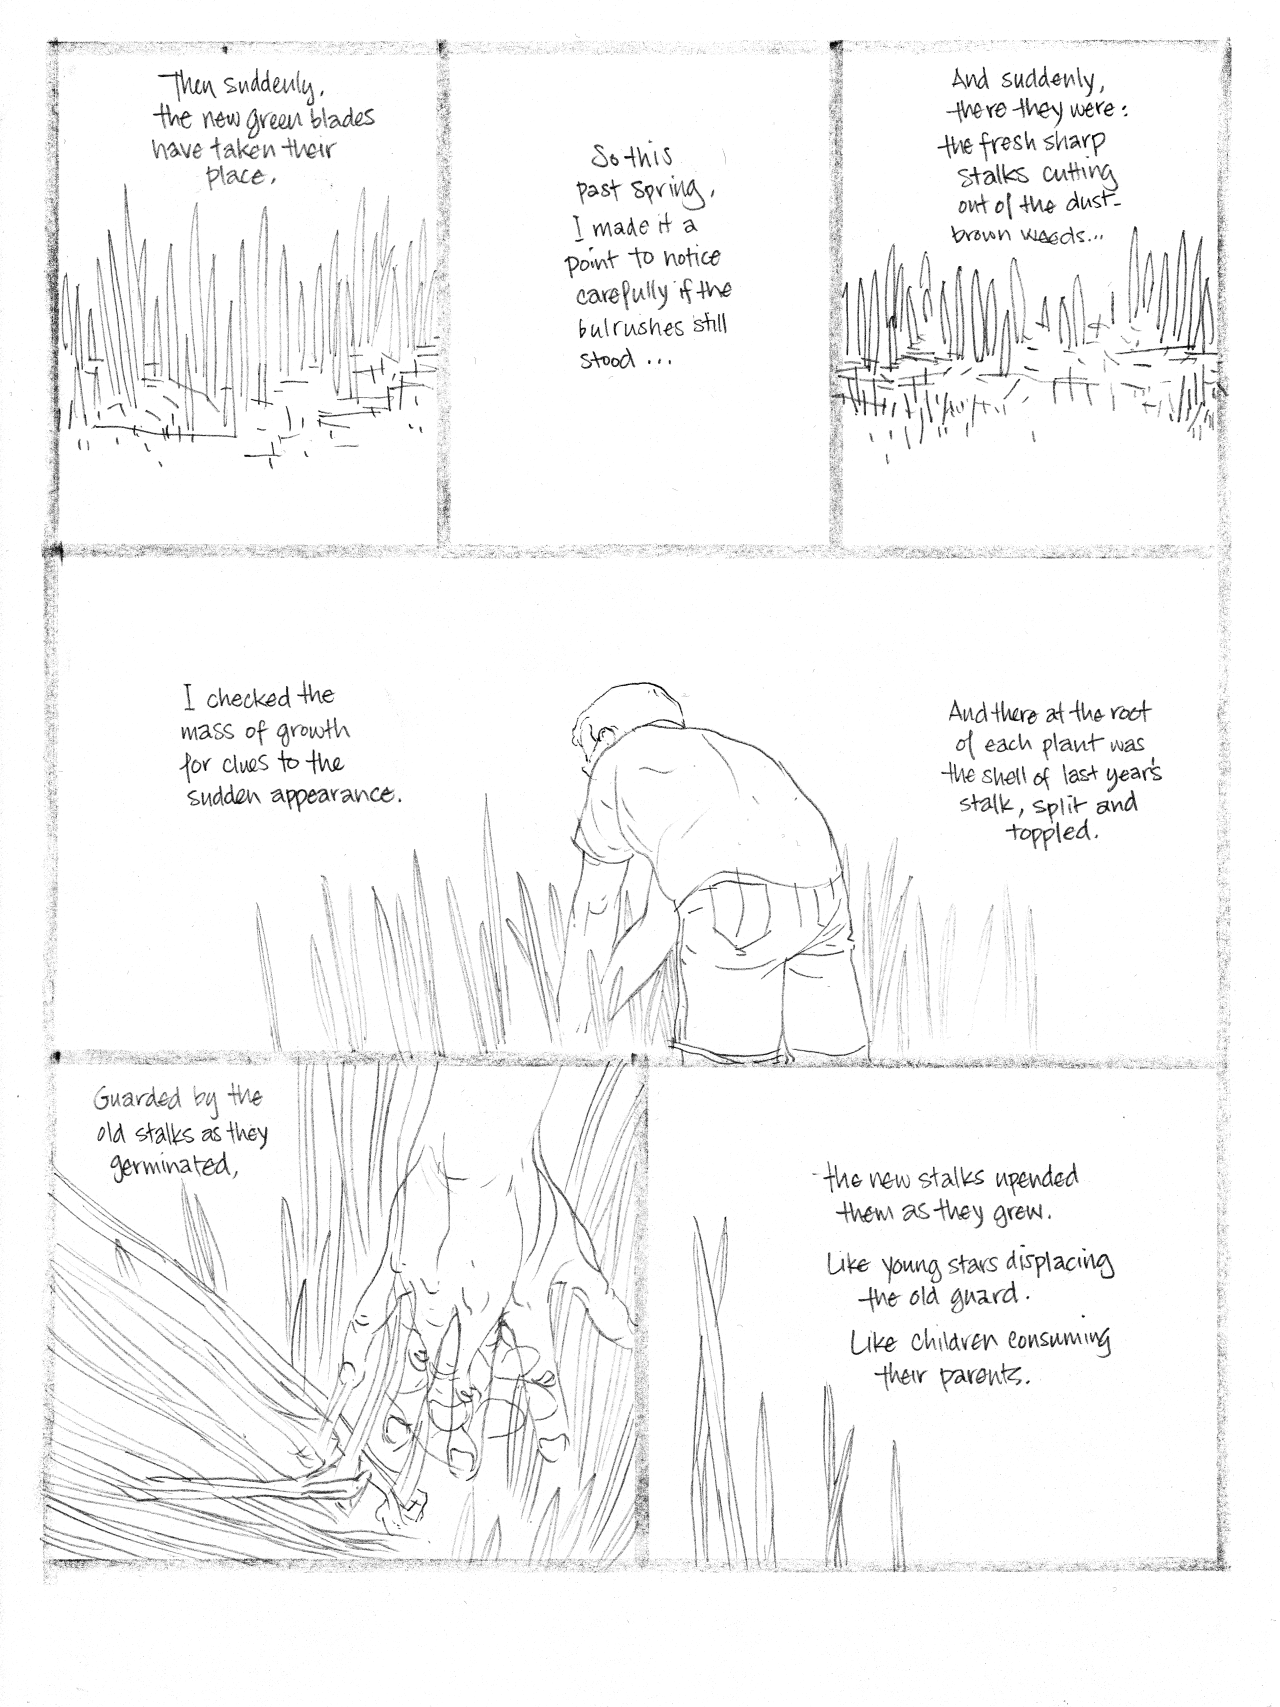 In Pieces: Someplace Which I Call Home (2/4) - Page 4